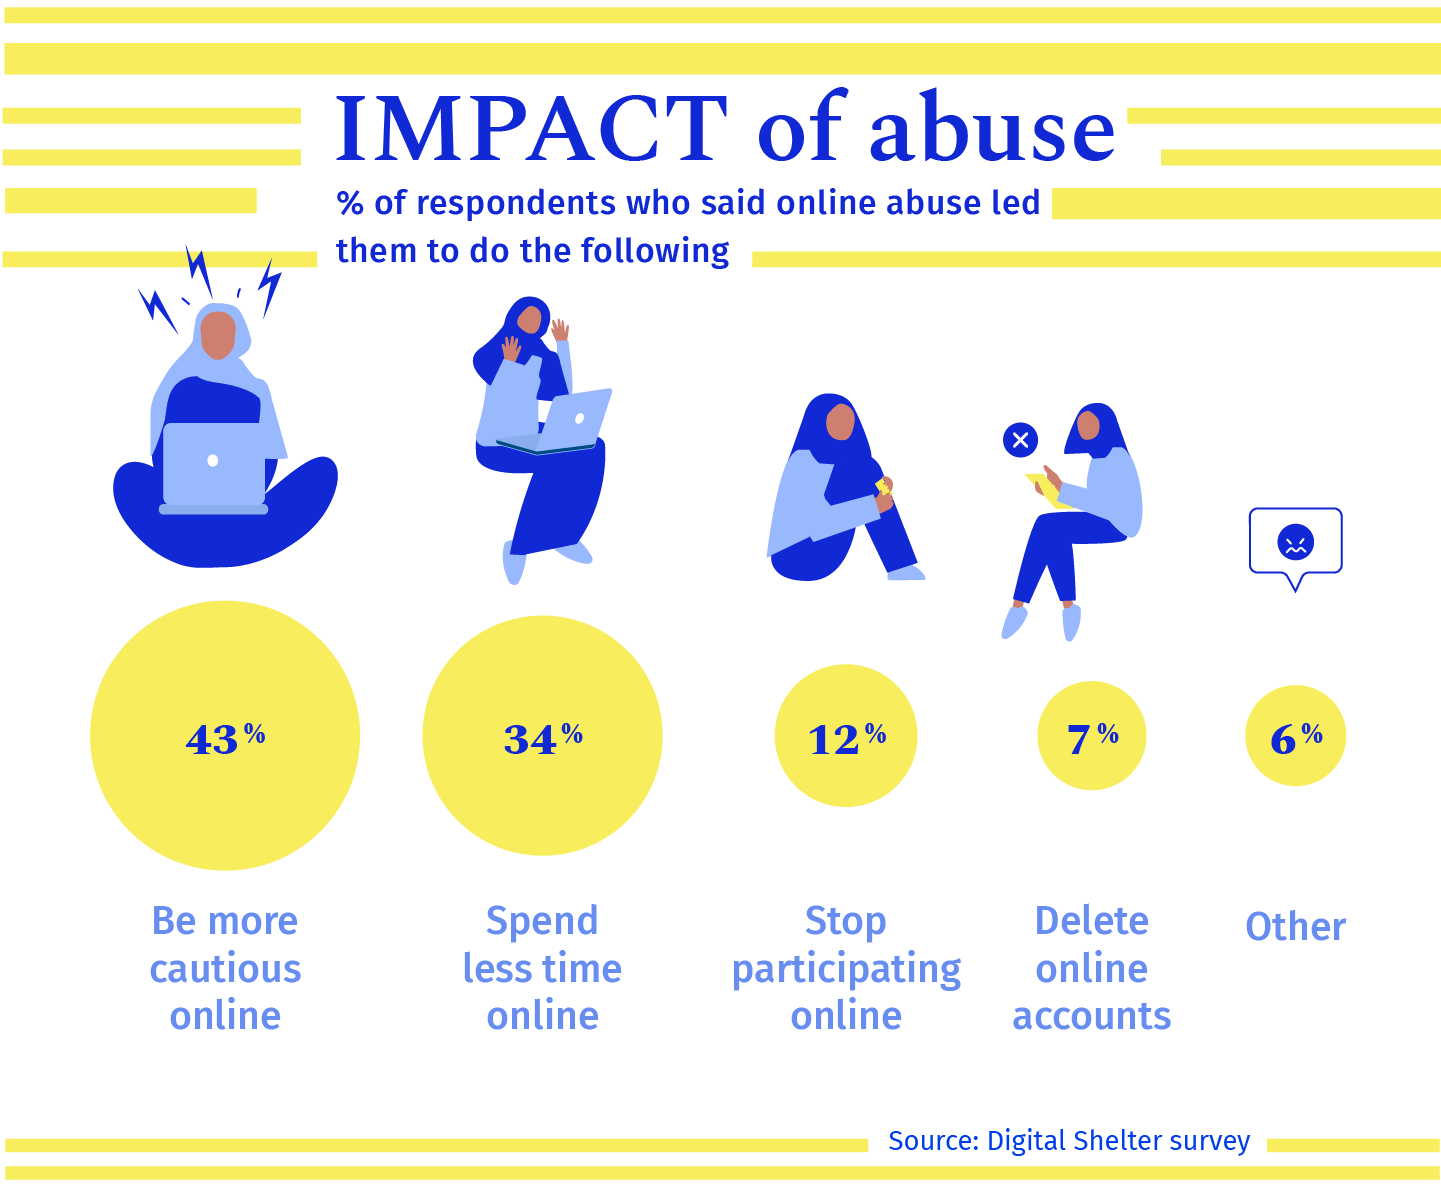 Chart showing the survey results when respondents to Digital Shelter's survey were asked about the impact of online abuse. 43% said online abuse led them to be more cautious online, 34% said it led them to spend less time online, 12% said it led them to stop participating online, 7% said it led them to delete their online accounts. A further 6% put their own other response.